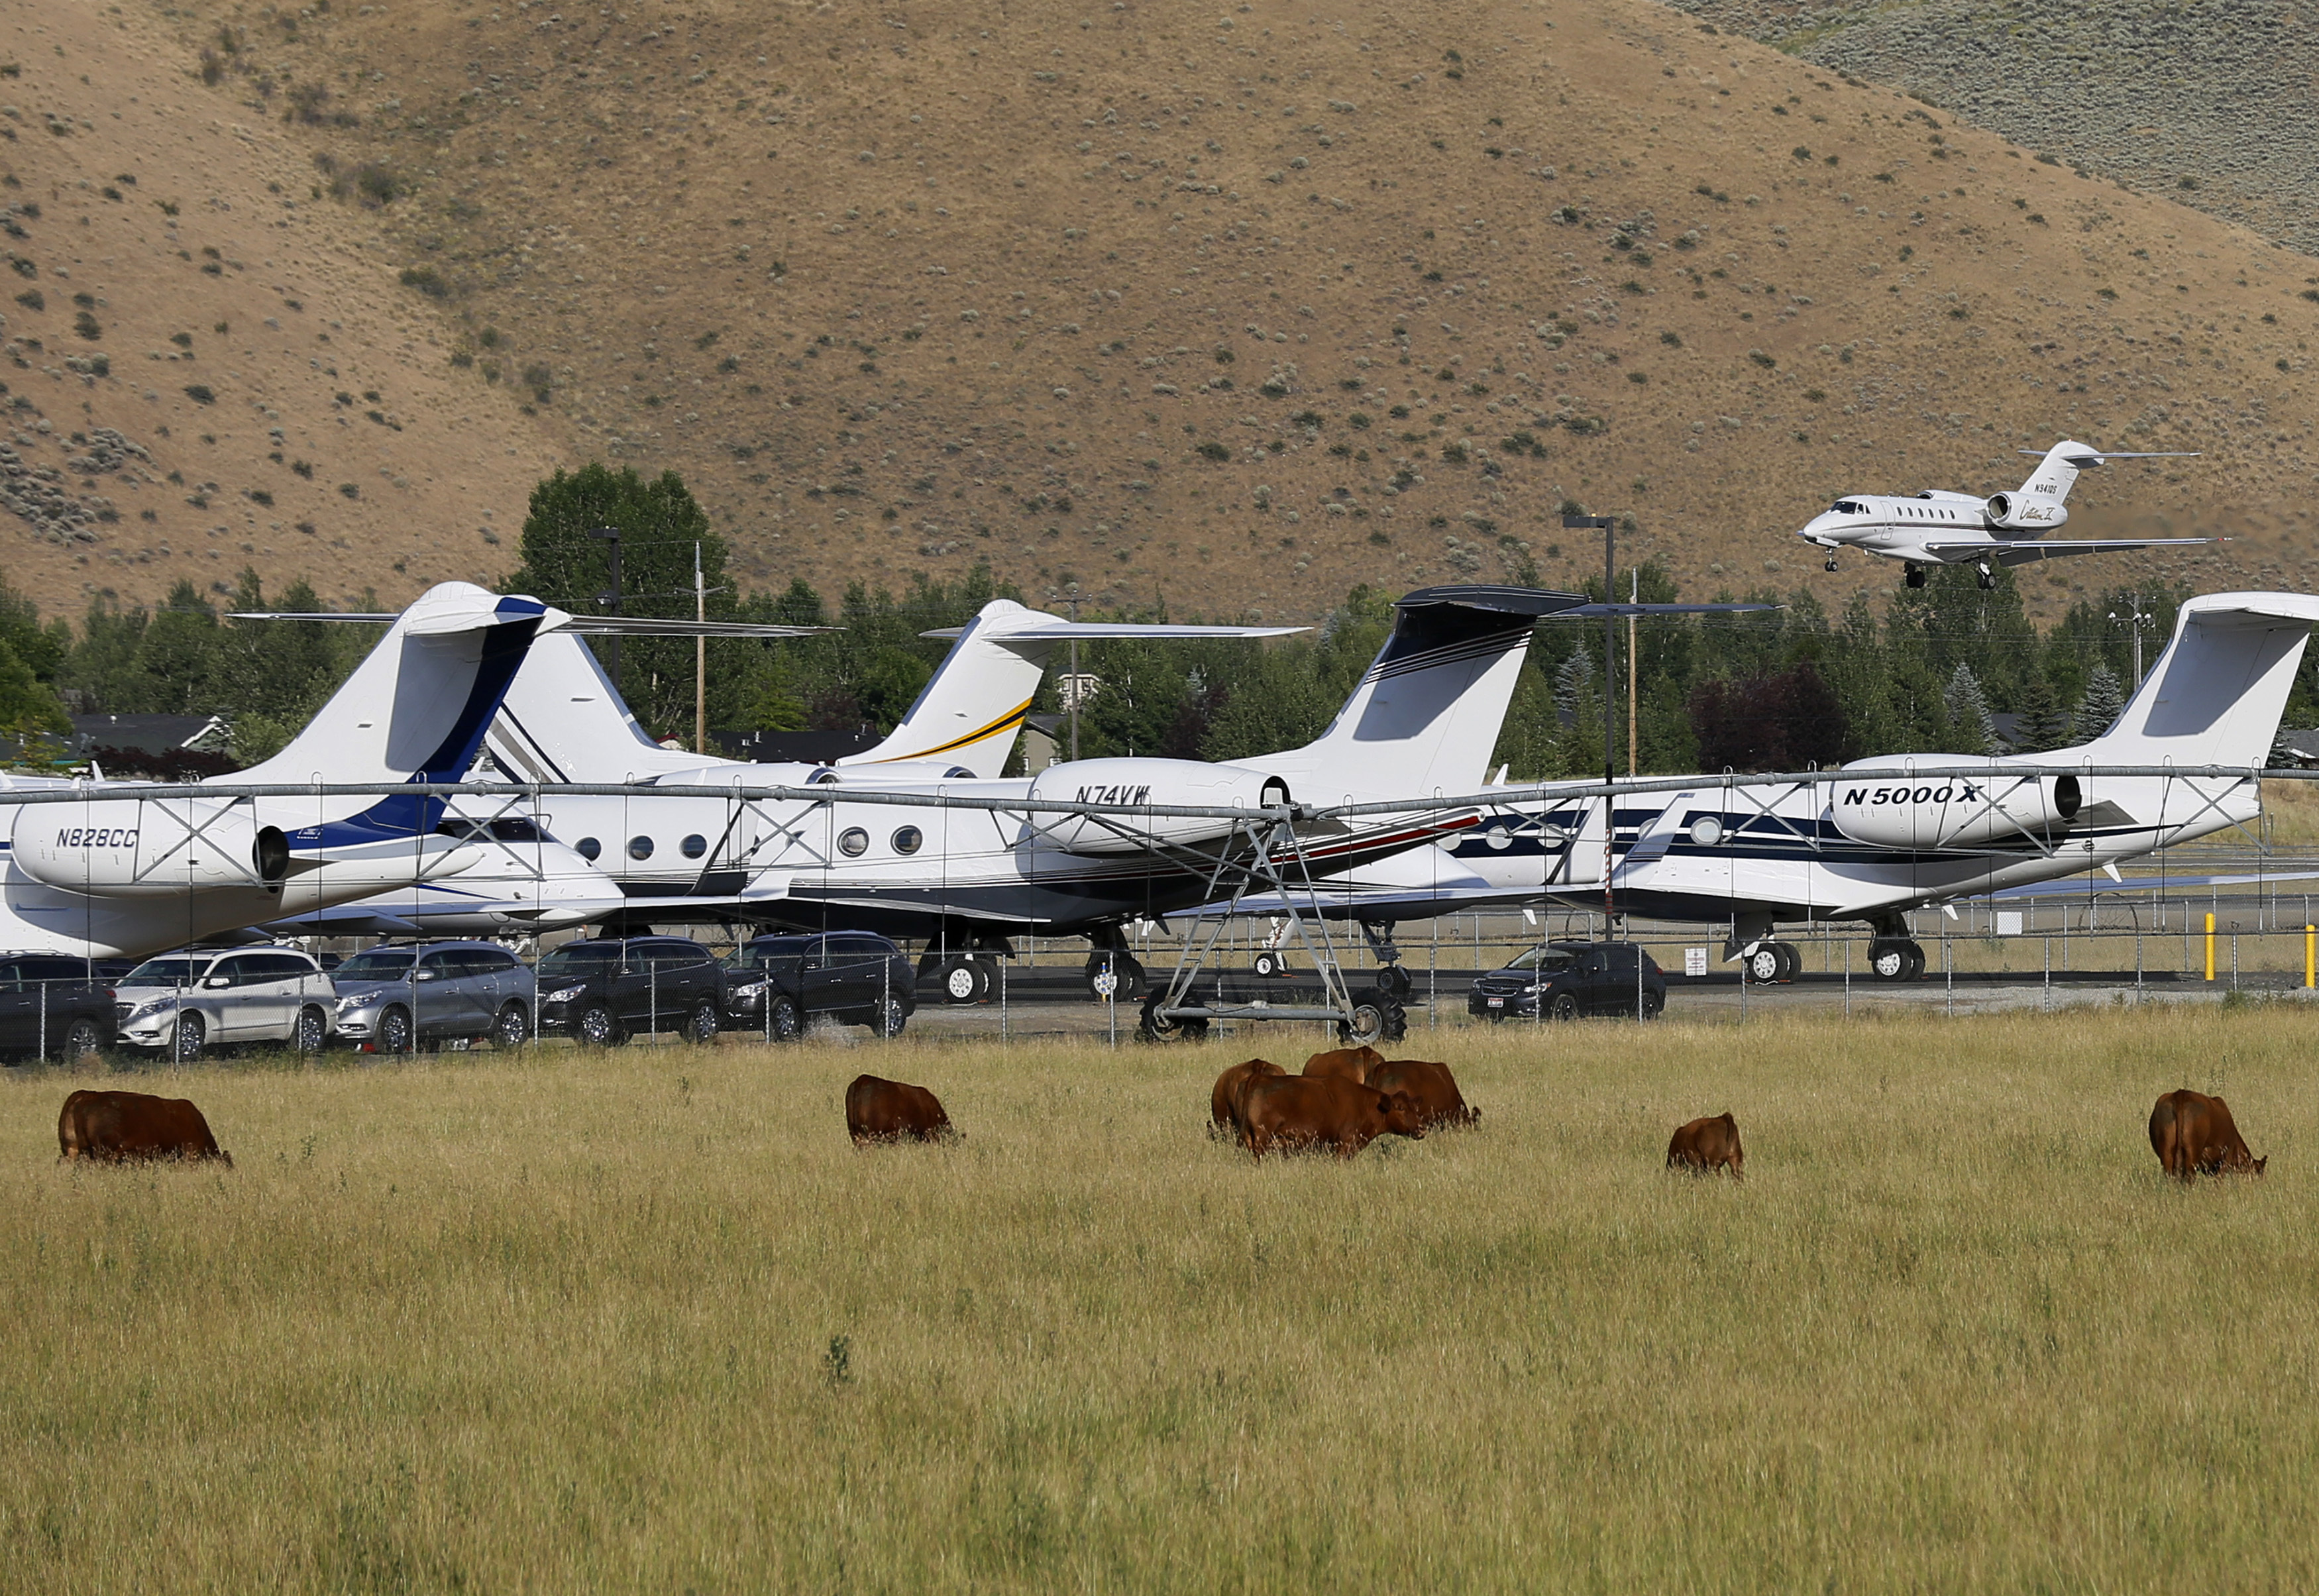 A private jet lands at the Sun Valley airport, in Hailey, Idaho